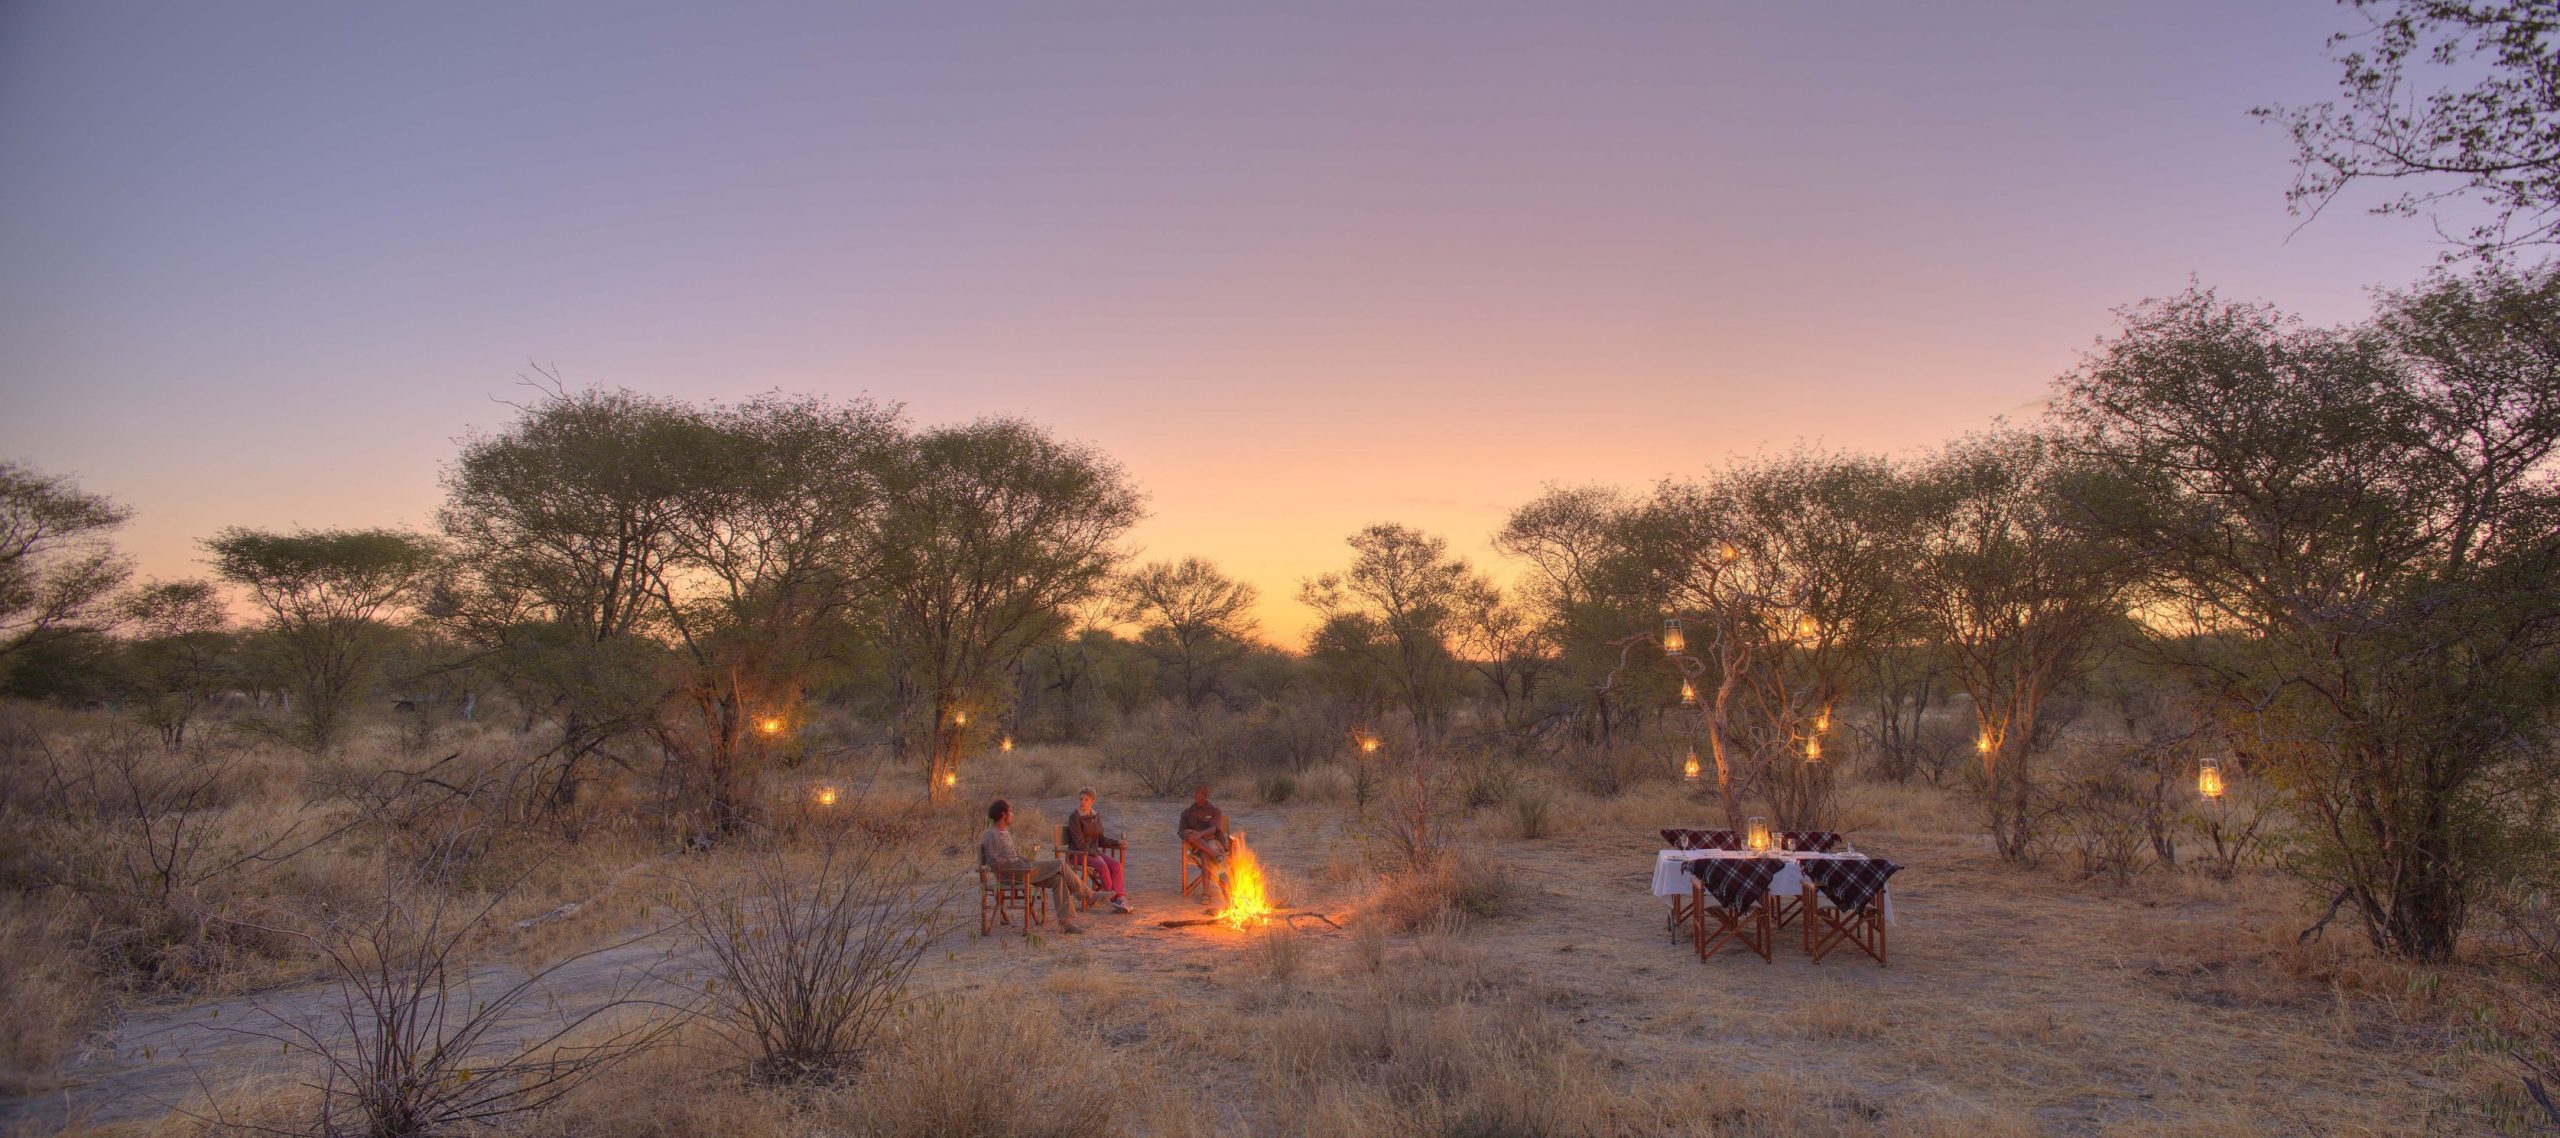 With a raft of exciting new safari camps and lodges poised to open, there’s no better time to explore Africa’s diverse and mesmerizing landscapes.